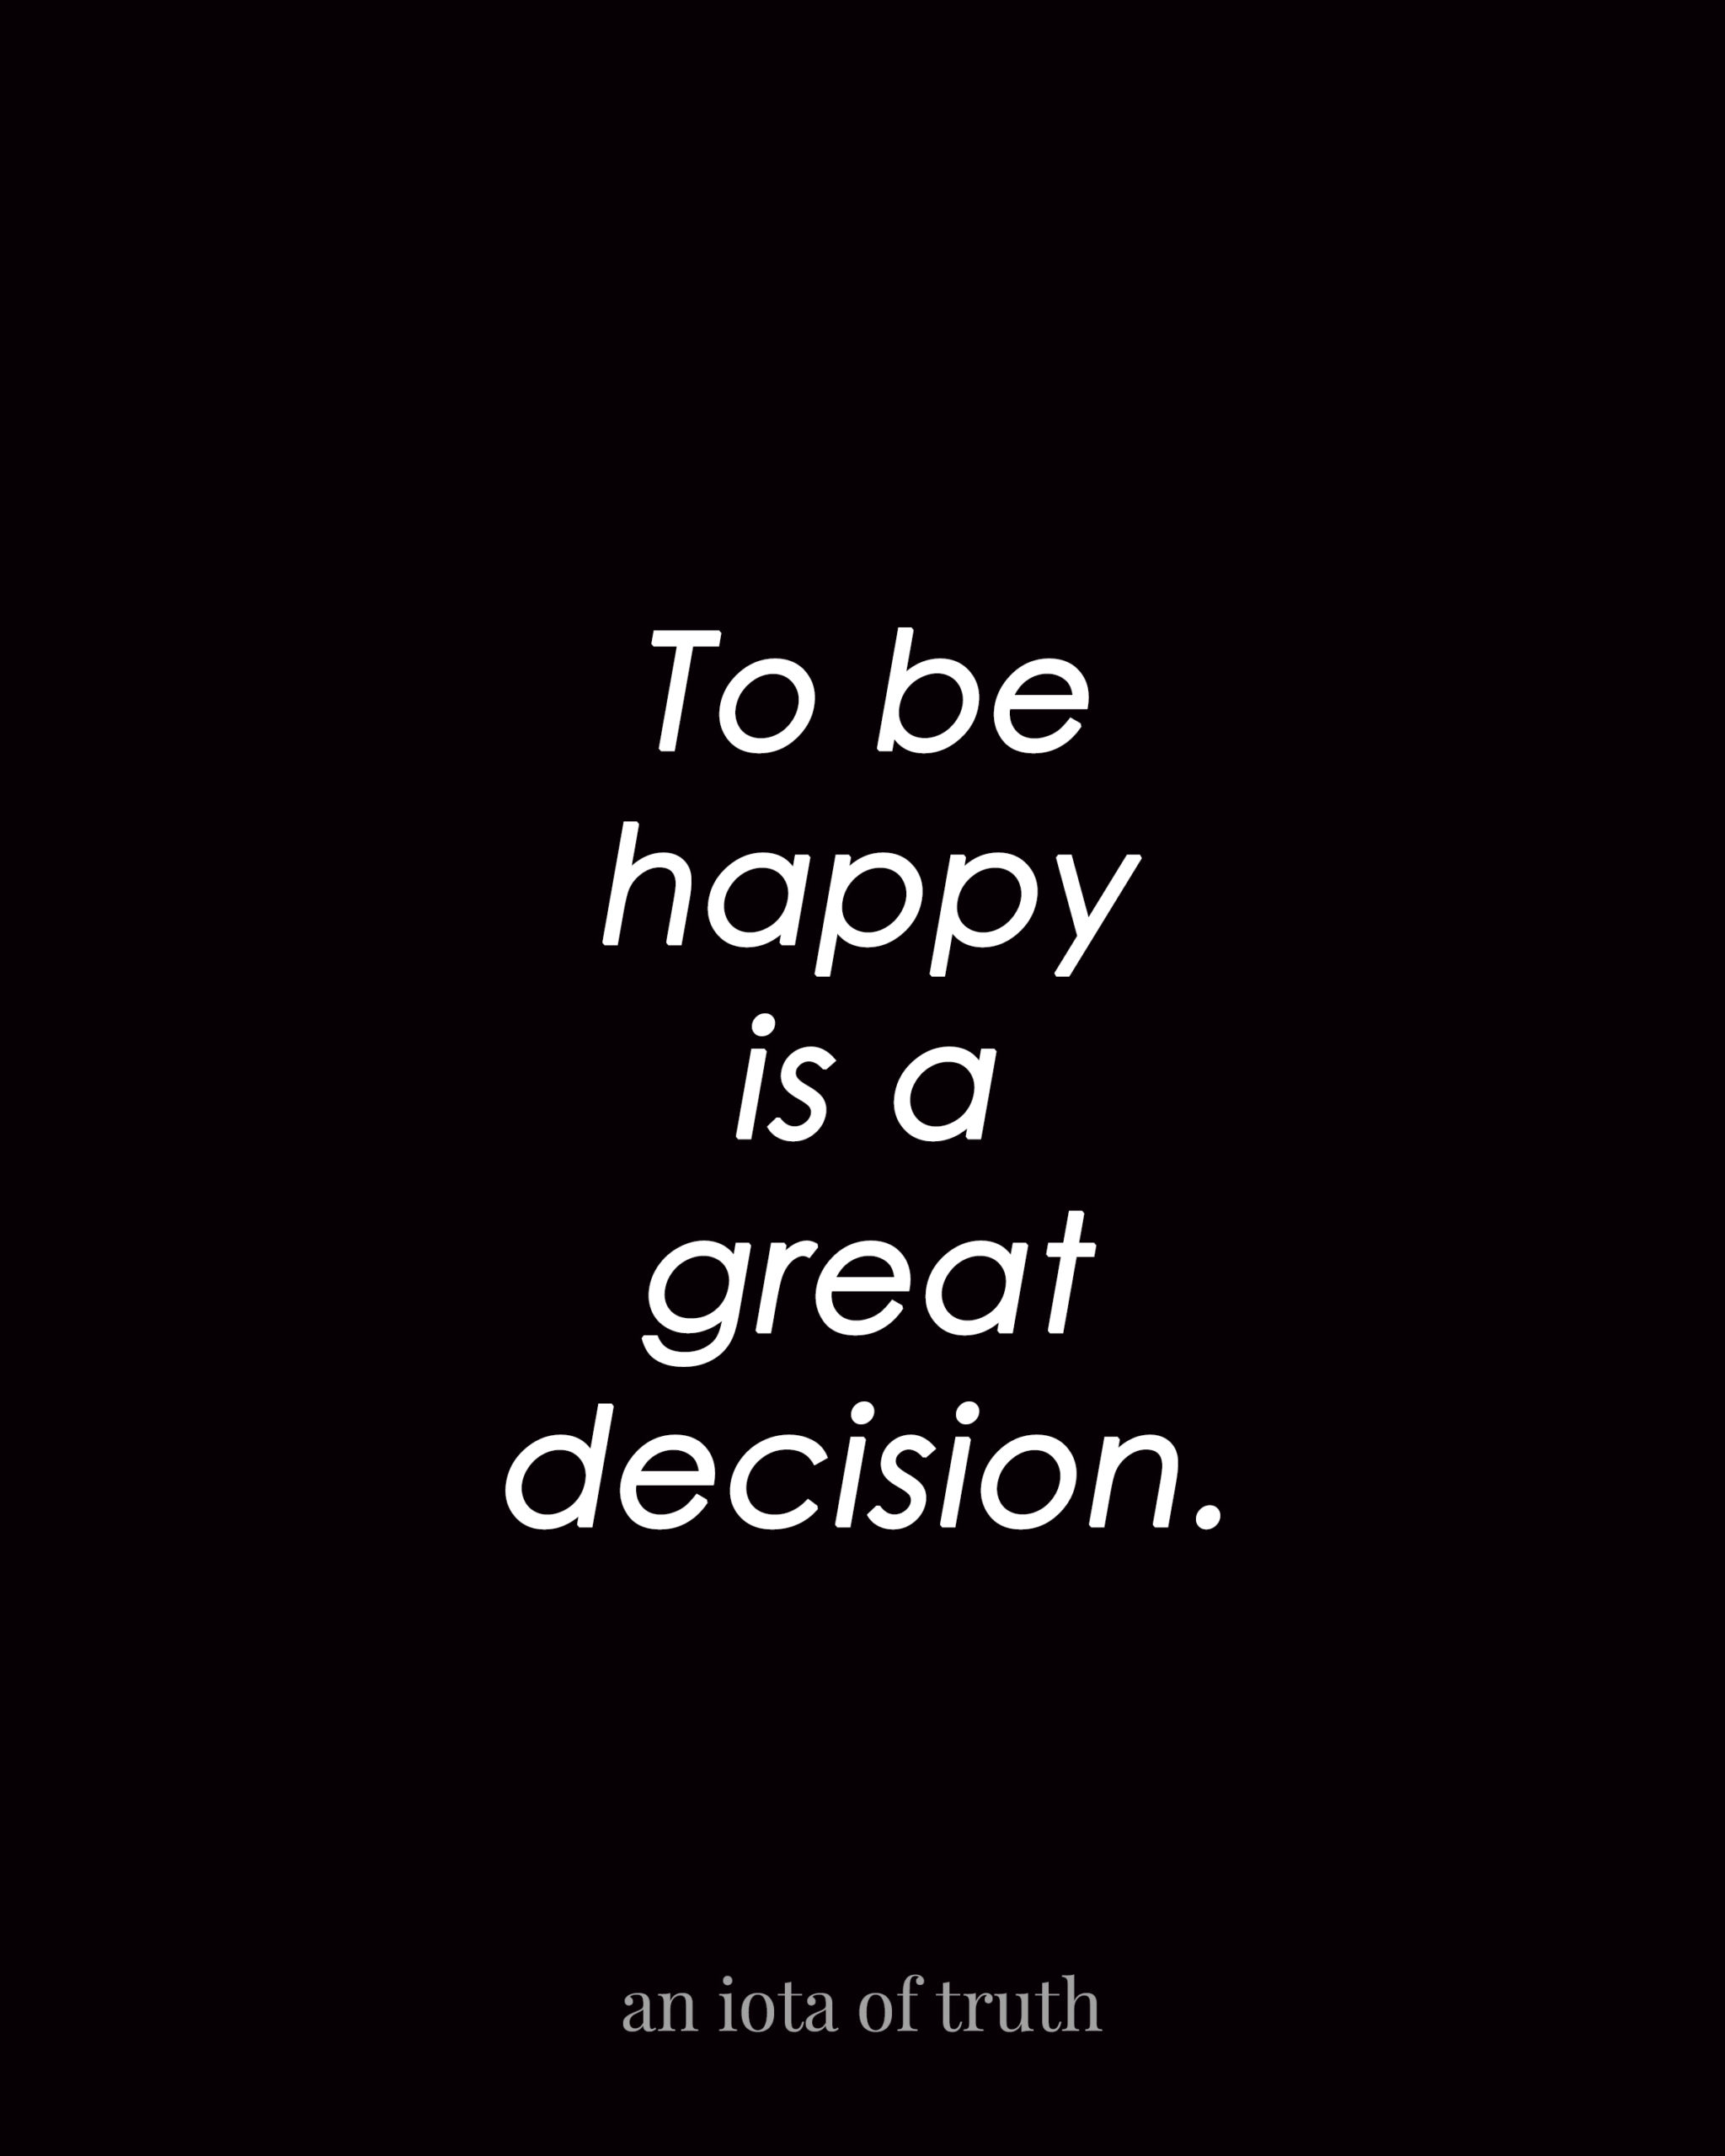 To be happy is a great decision.